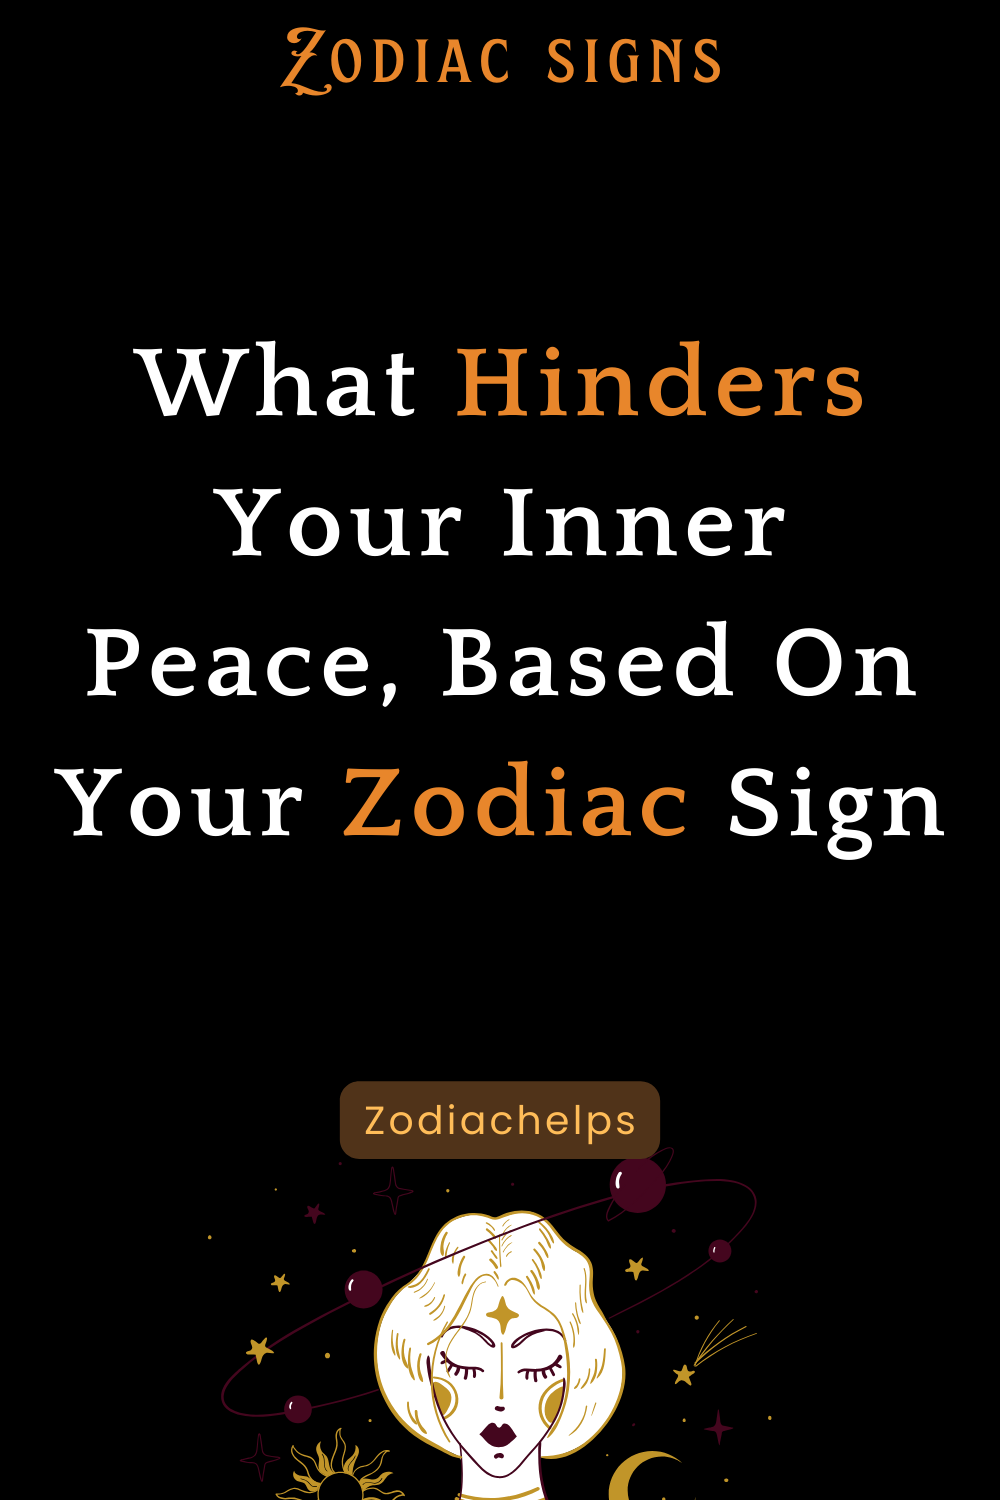 What Hinders Your Inner Peace, Based On Your Zodiac Sign